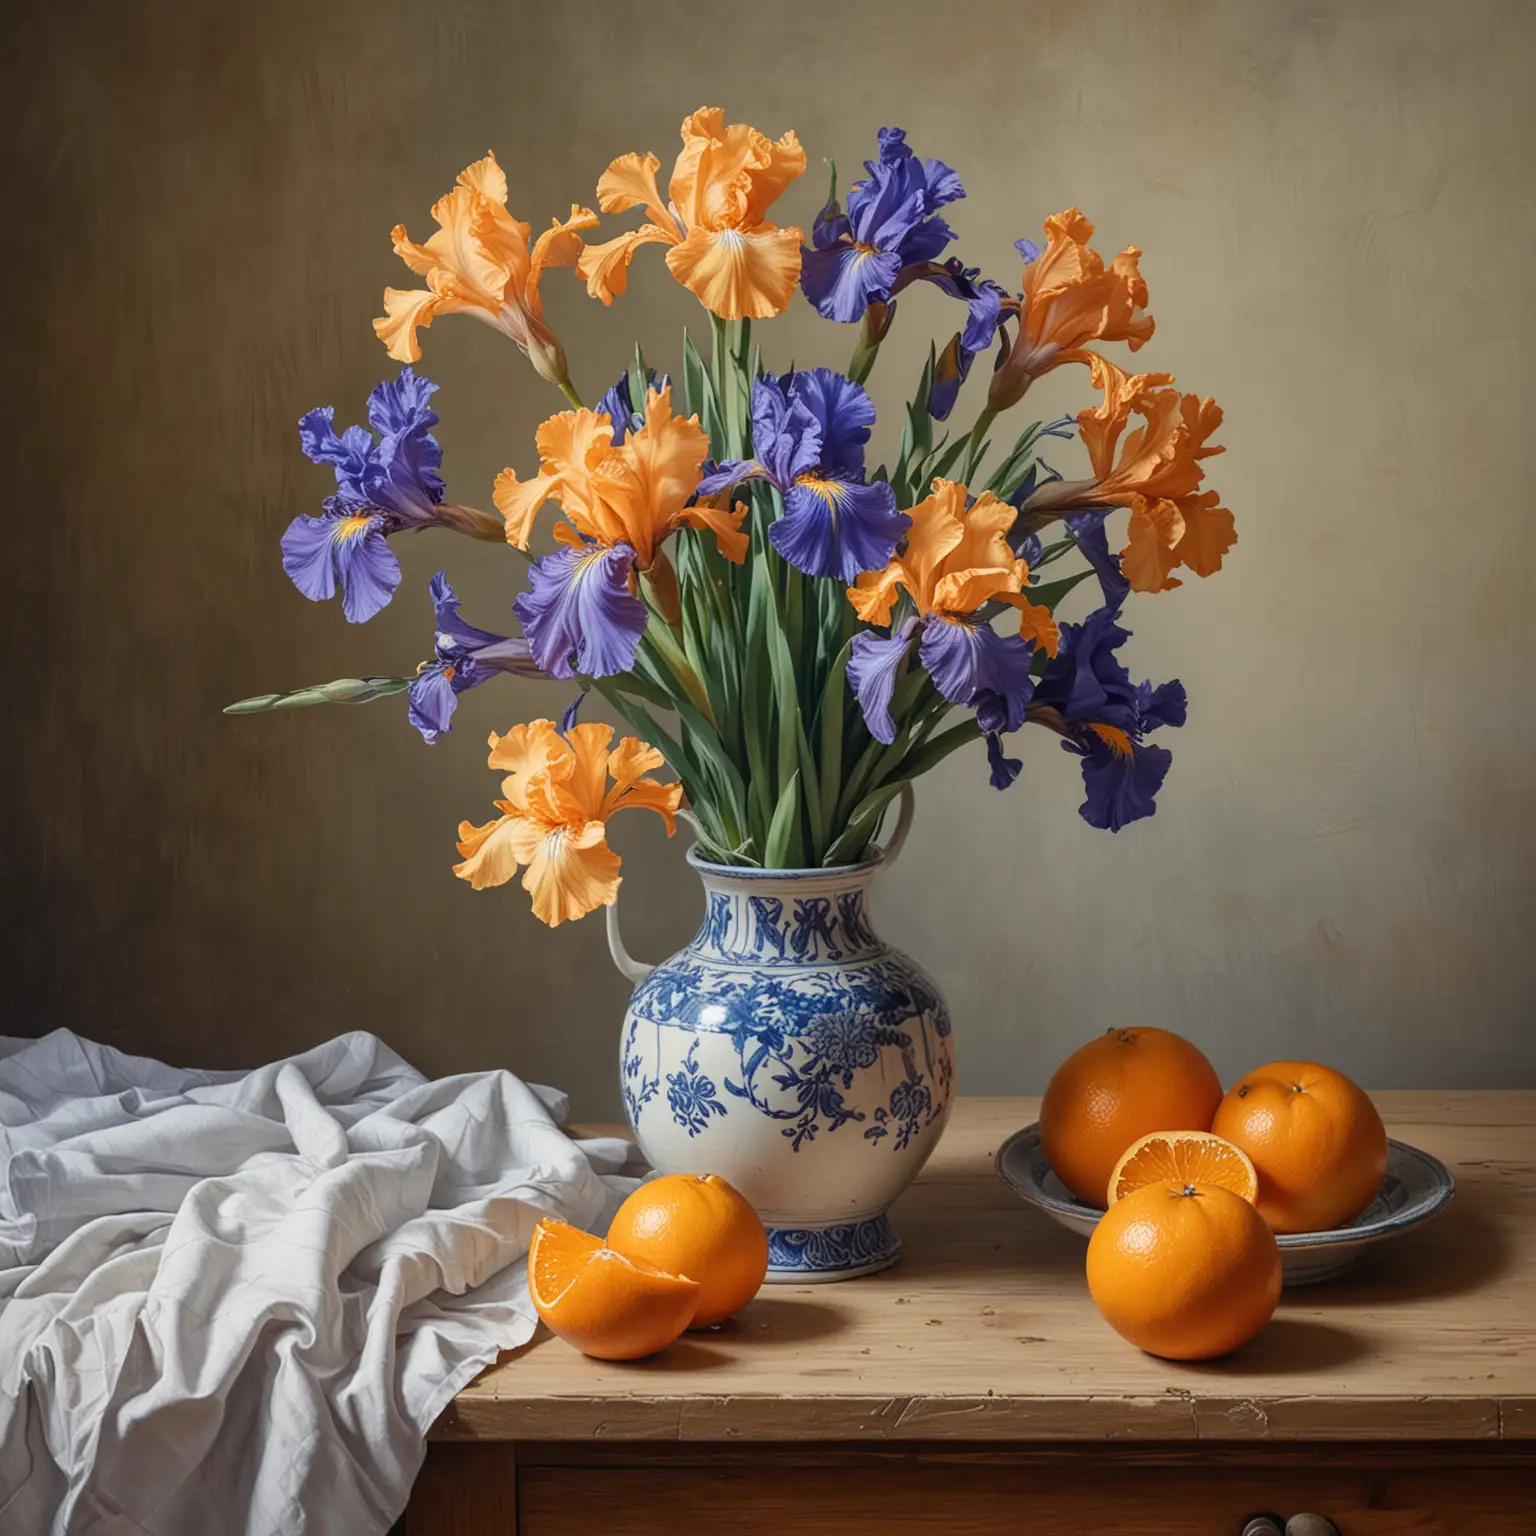 Vibrant Still Life Painting Iris Flowers and Oranges on Table